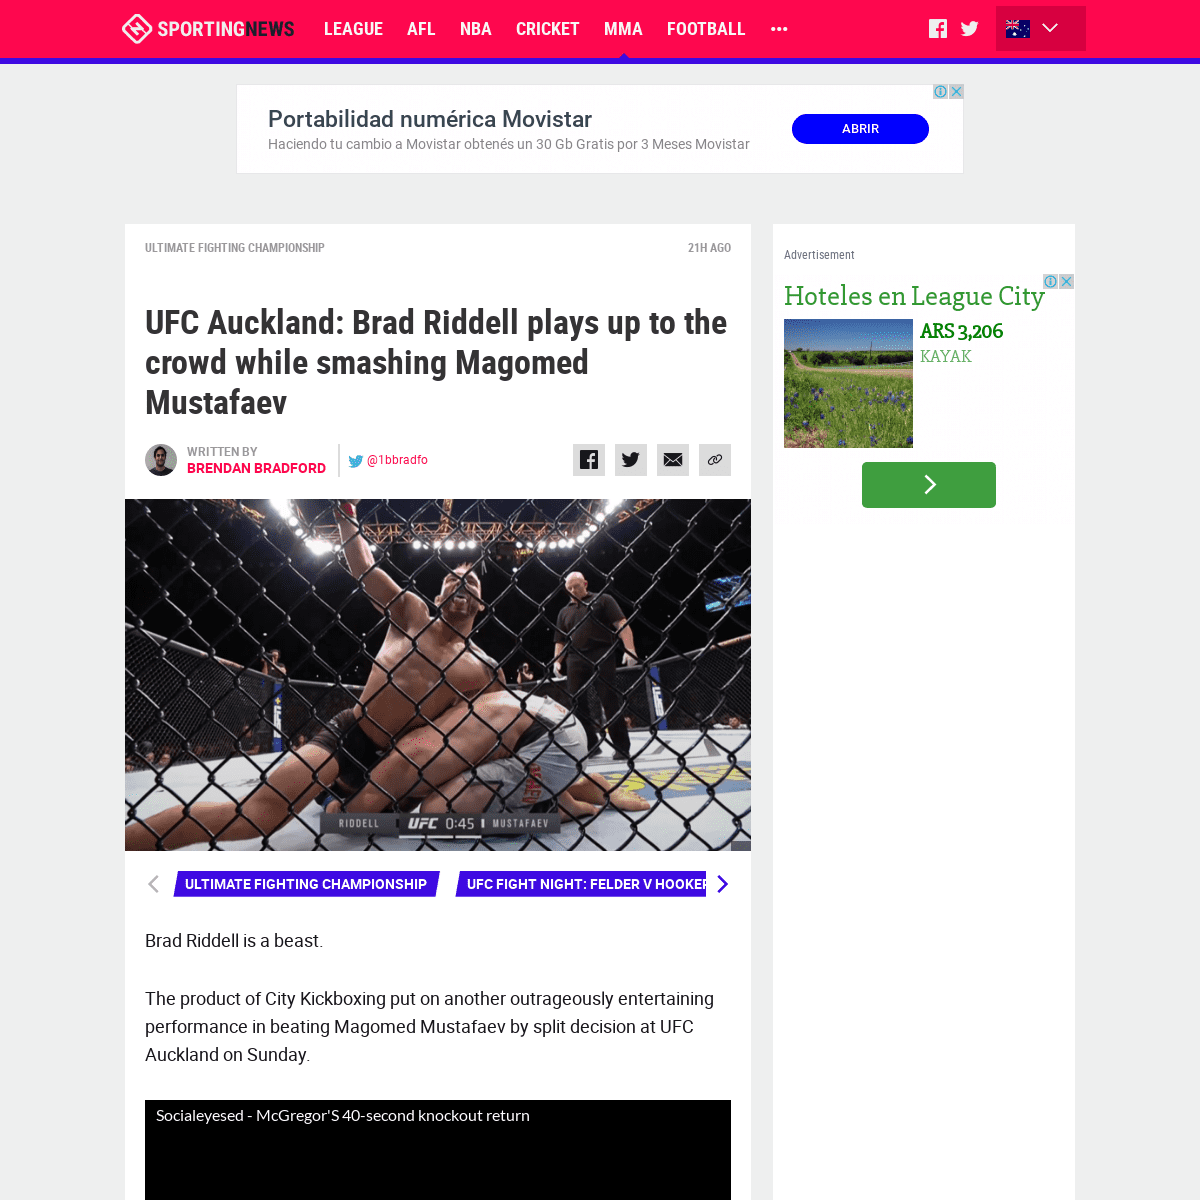 A complete backup of www.sportingnews.com/au/mma/news/ufc-auckland-brad-riddell-plays-up-to-the-crowd-while-smashing-magomed-mus